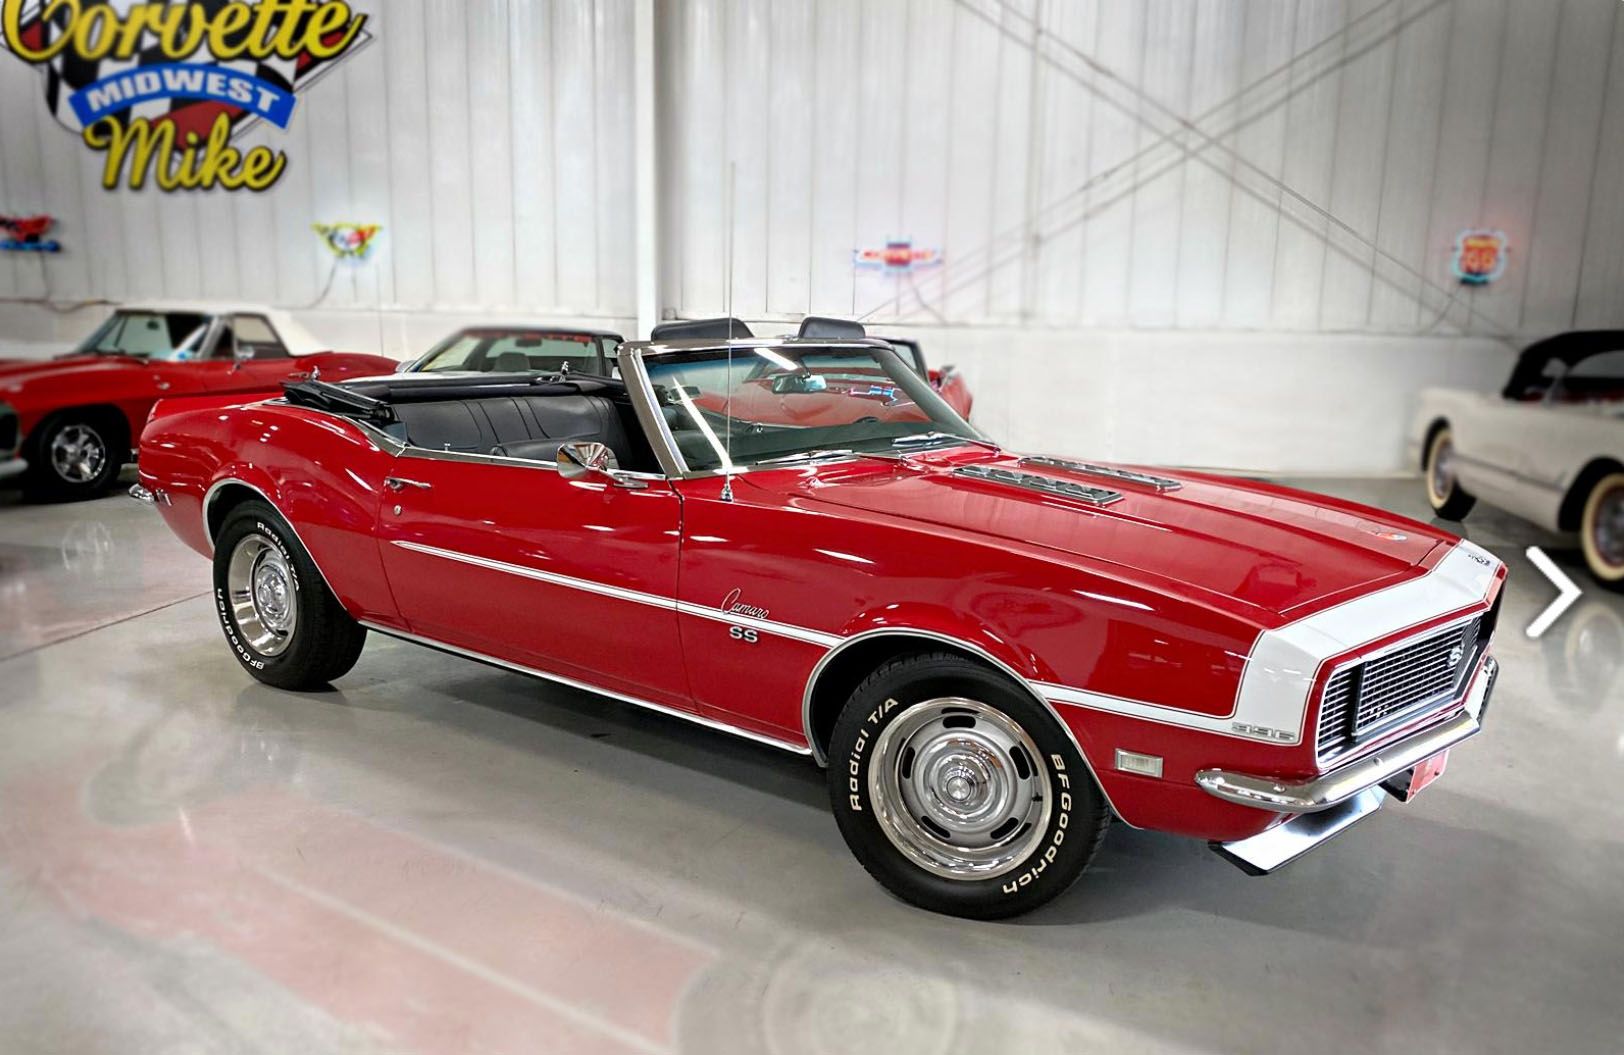 <auction-1968-chevy-camaro-rs-ss.jpg" alt="A stunning 1968 Chevrolet Camaro in Matador Red with white RS stripes">